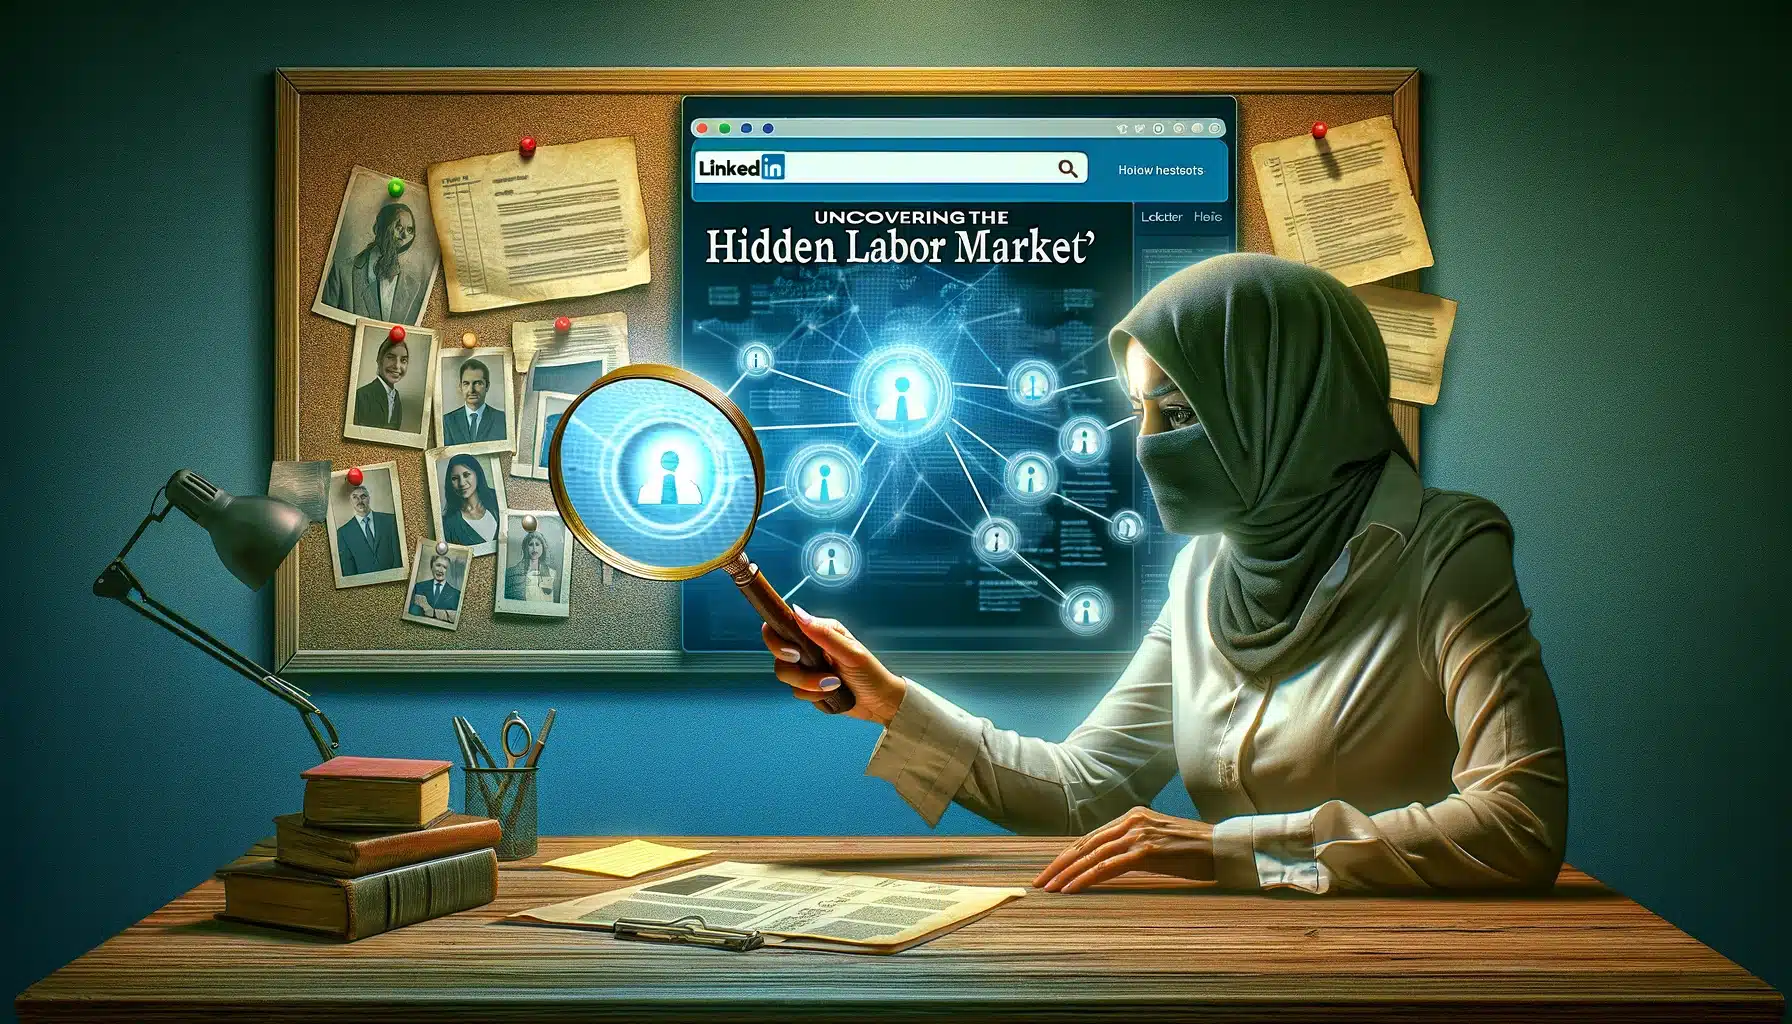 Uncovering the Hidden Labor Market